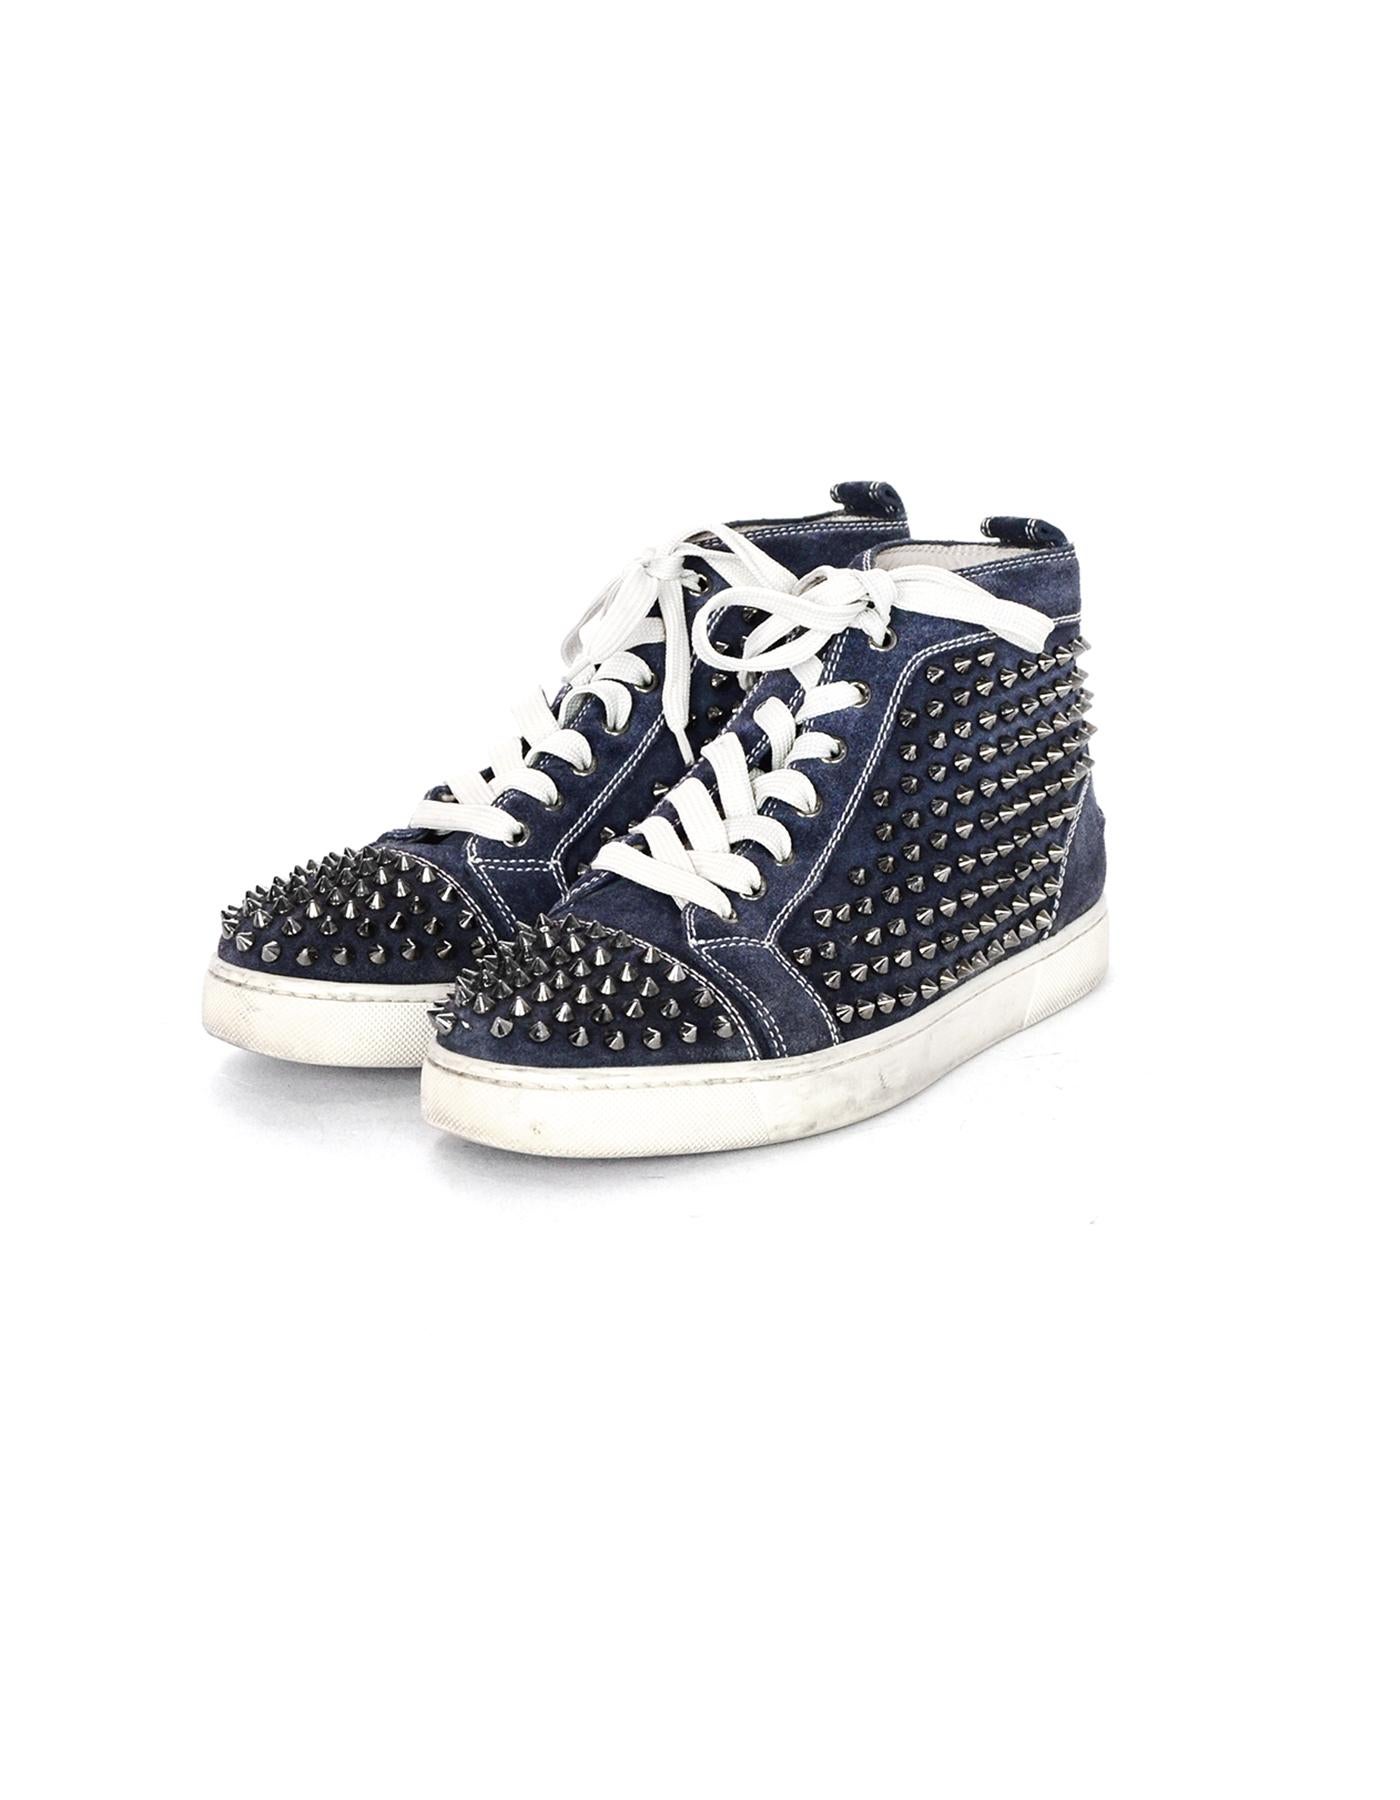 Black Christian Louboutin Navy Suede Louis Spiked Hi Top Sneakers Sz 40.5 W/ 2 DB